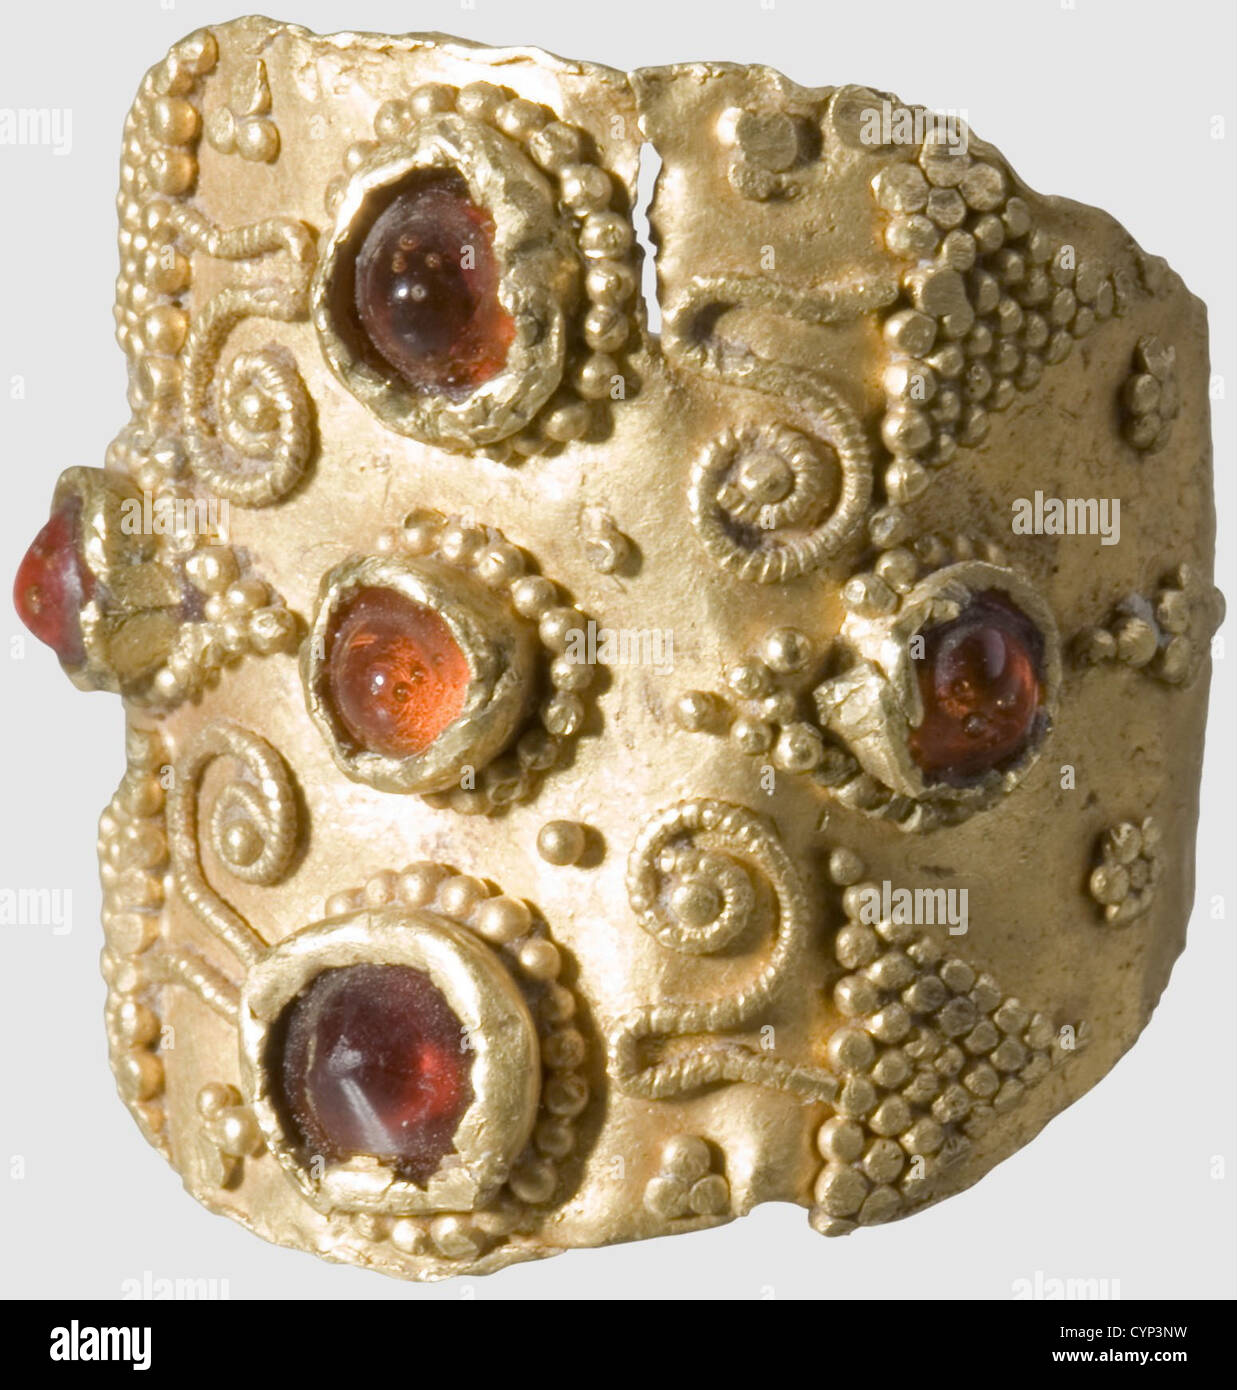 A gold ring from the Early Middle Ages, Franconian, 5th/6th century A.D. Gold ring consisting of one part with granulated grape ornaments and five dark red garnets set in a cruciform pattern. Diameter 15 mm, ring plate 18 mm, weight 4.5 g The granulation particularly fine, historic, historical, ancient world, ancient world, ancient times, object, objects, stills, clipping, cut out, cut-out, cut-outs, jewellery, jewelry, noble, precious, Additional-Rights-Clearences-Not Available Stock Photo